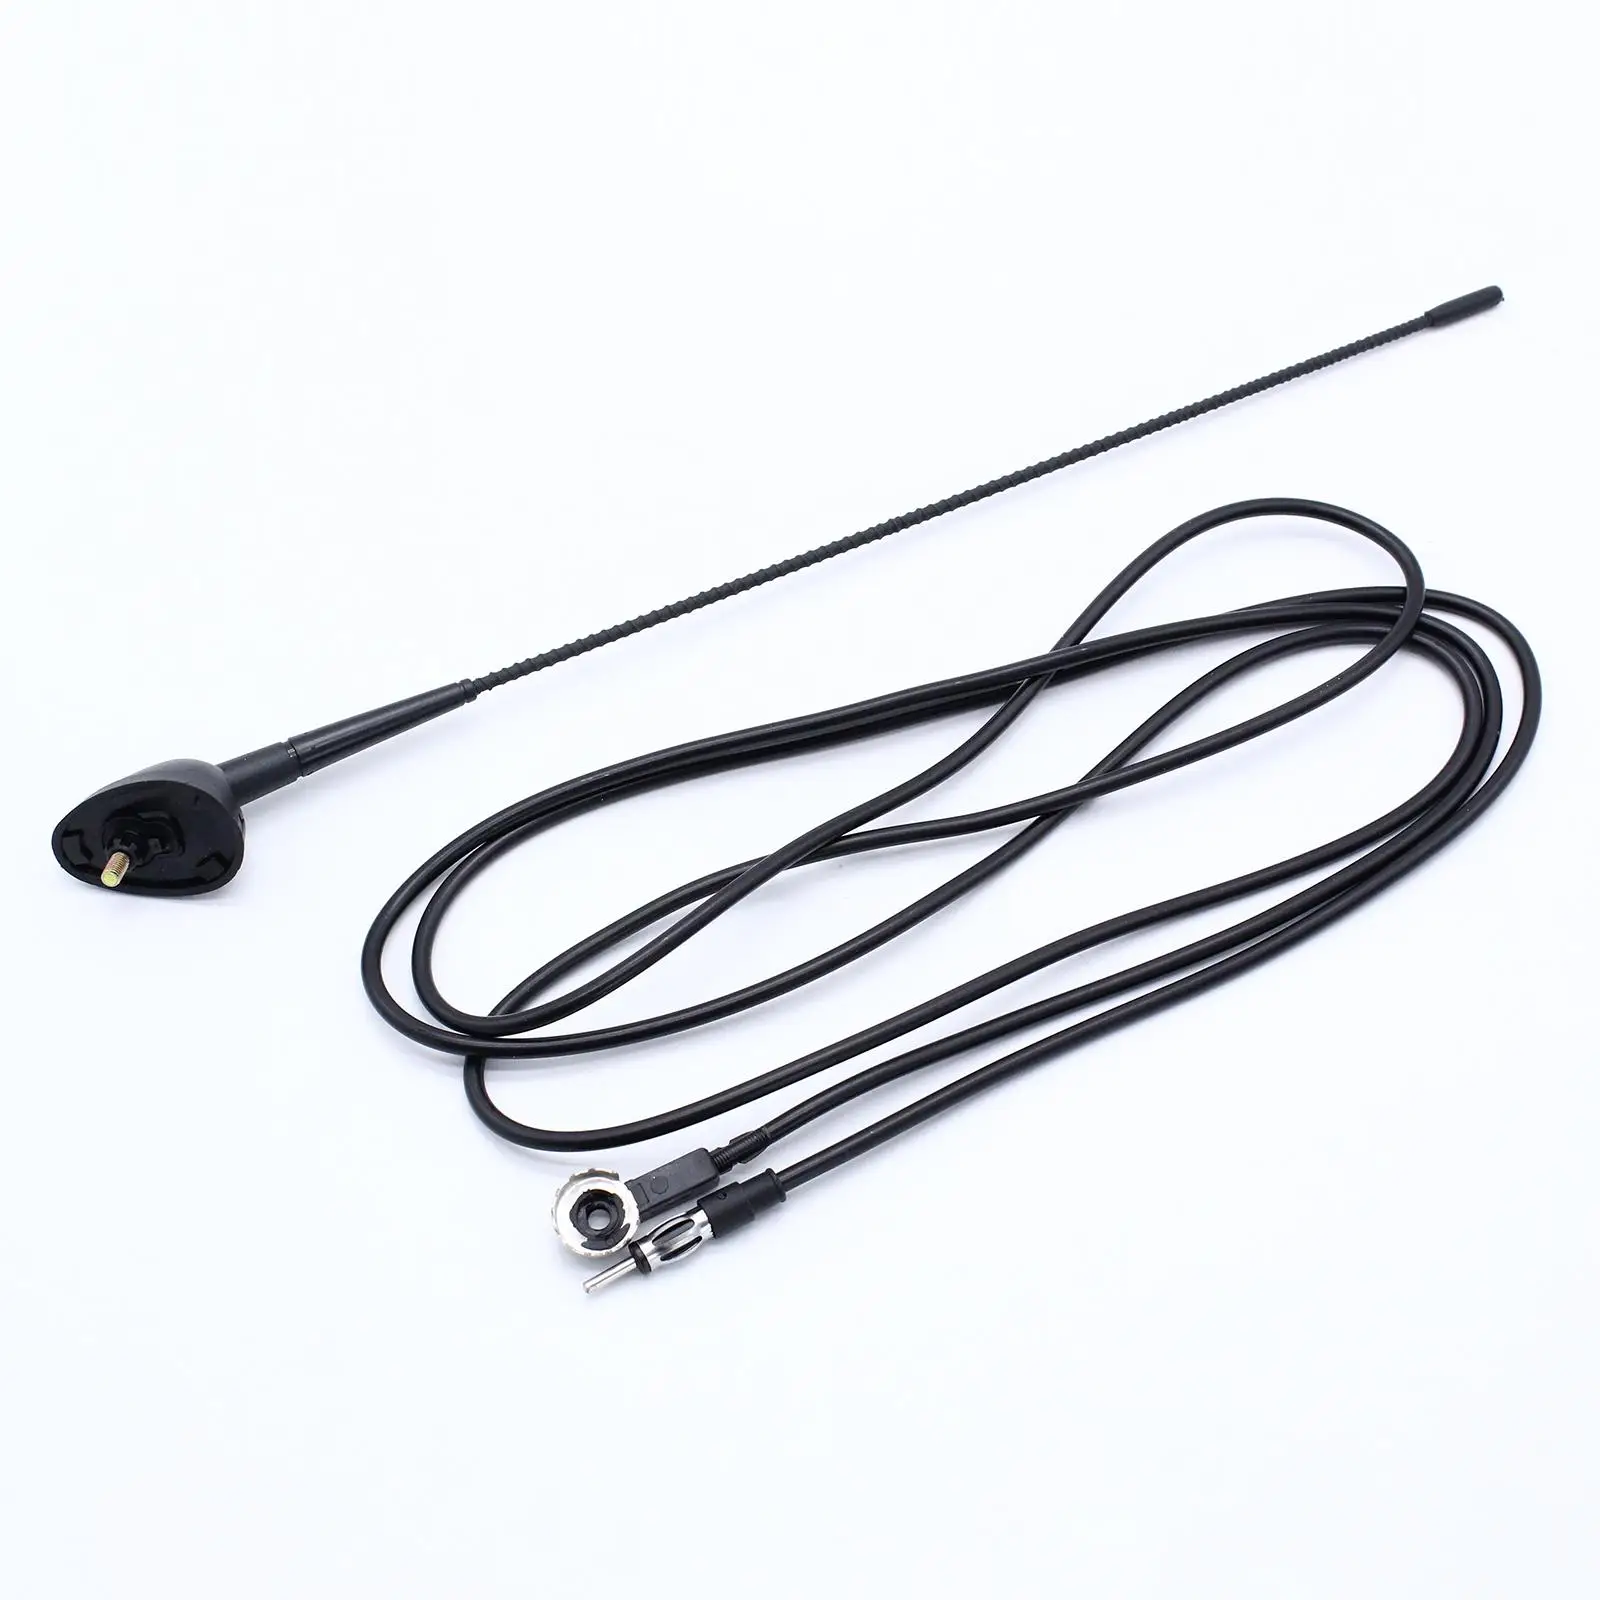 Front Roof Aerial Antenna Mast Cable 2858939969 High Quality Car Accessories for Fiat PUNTO Croma Regata Fiorino Ulysse